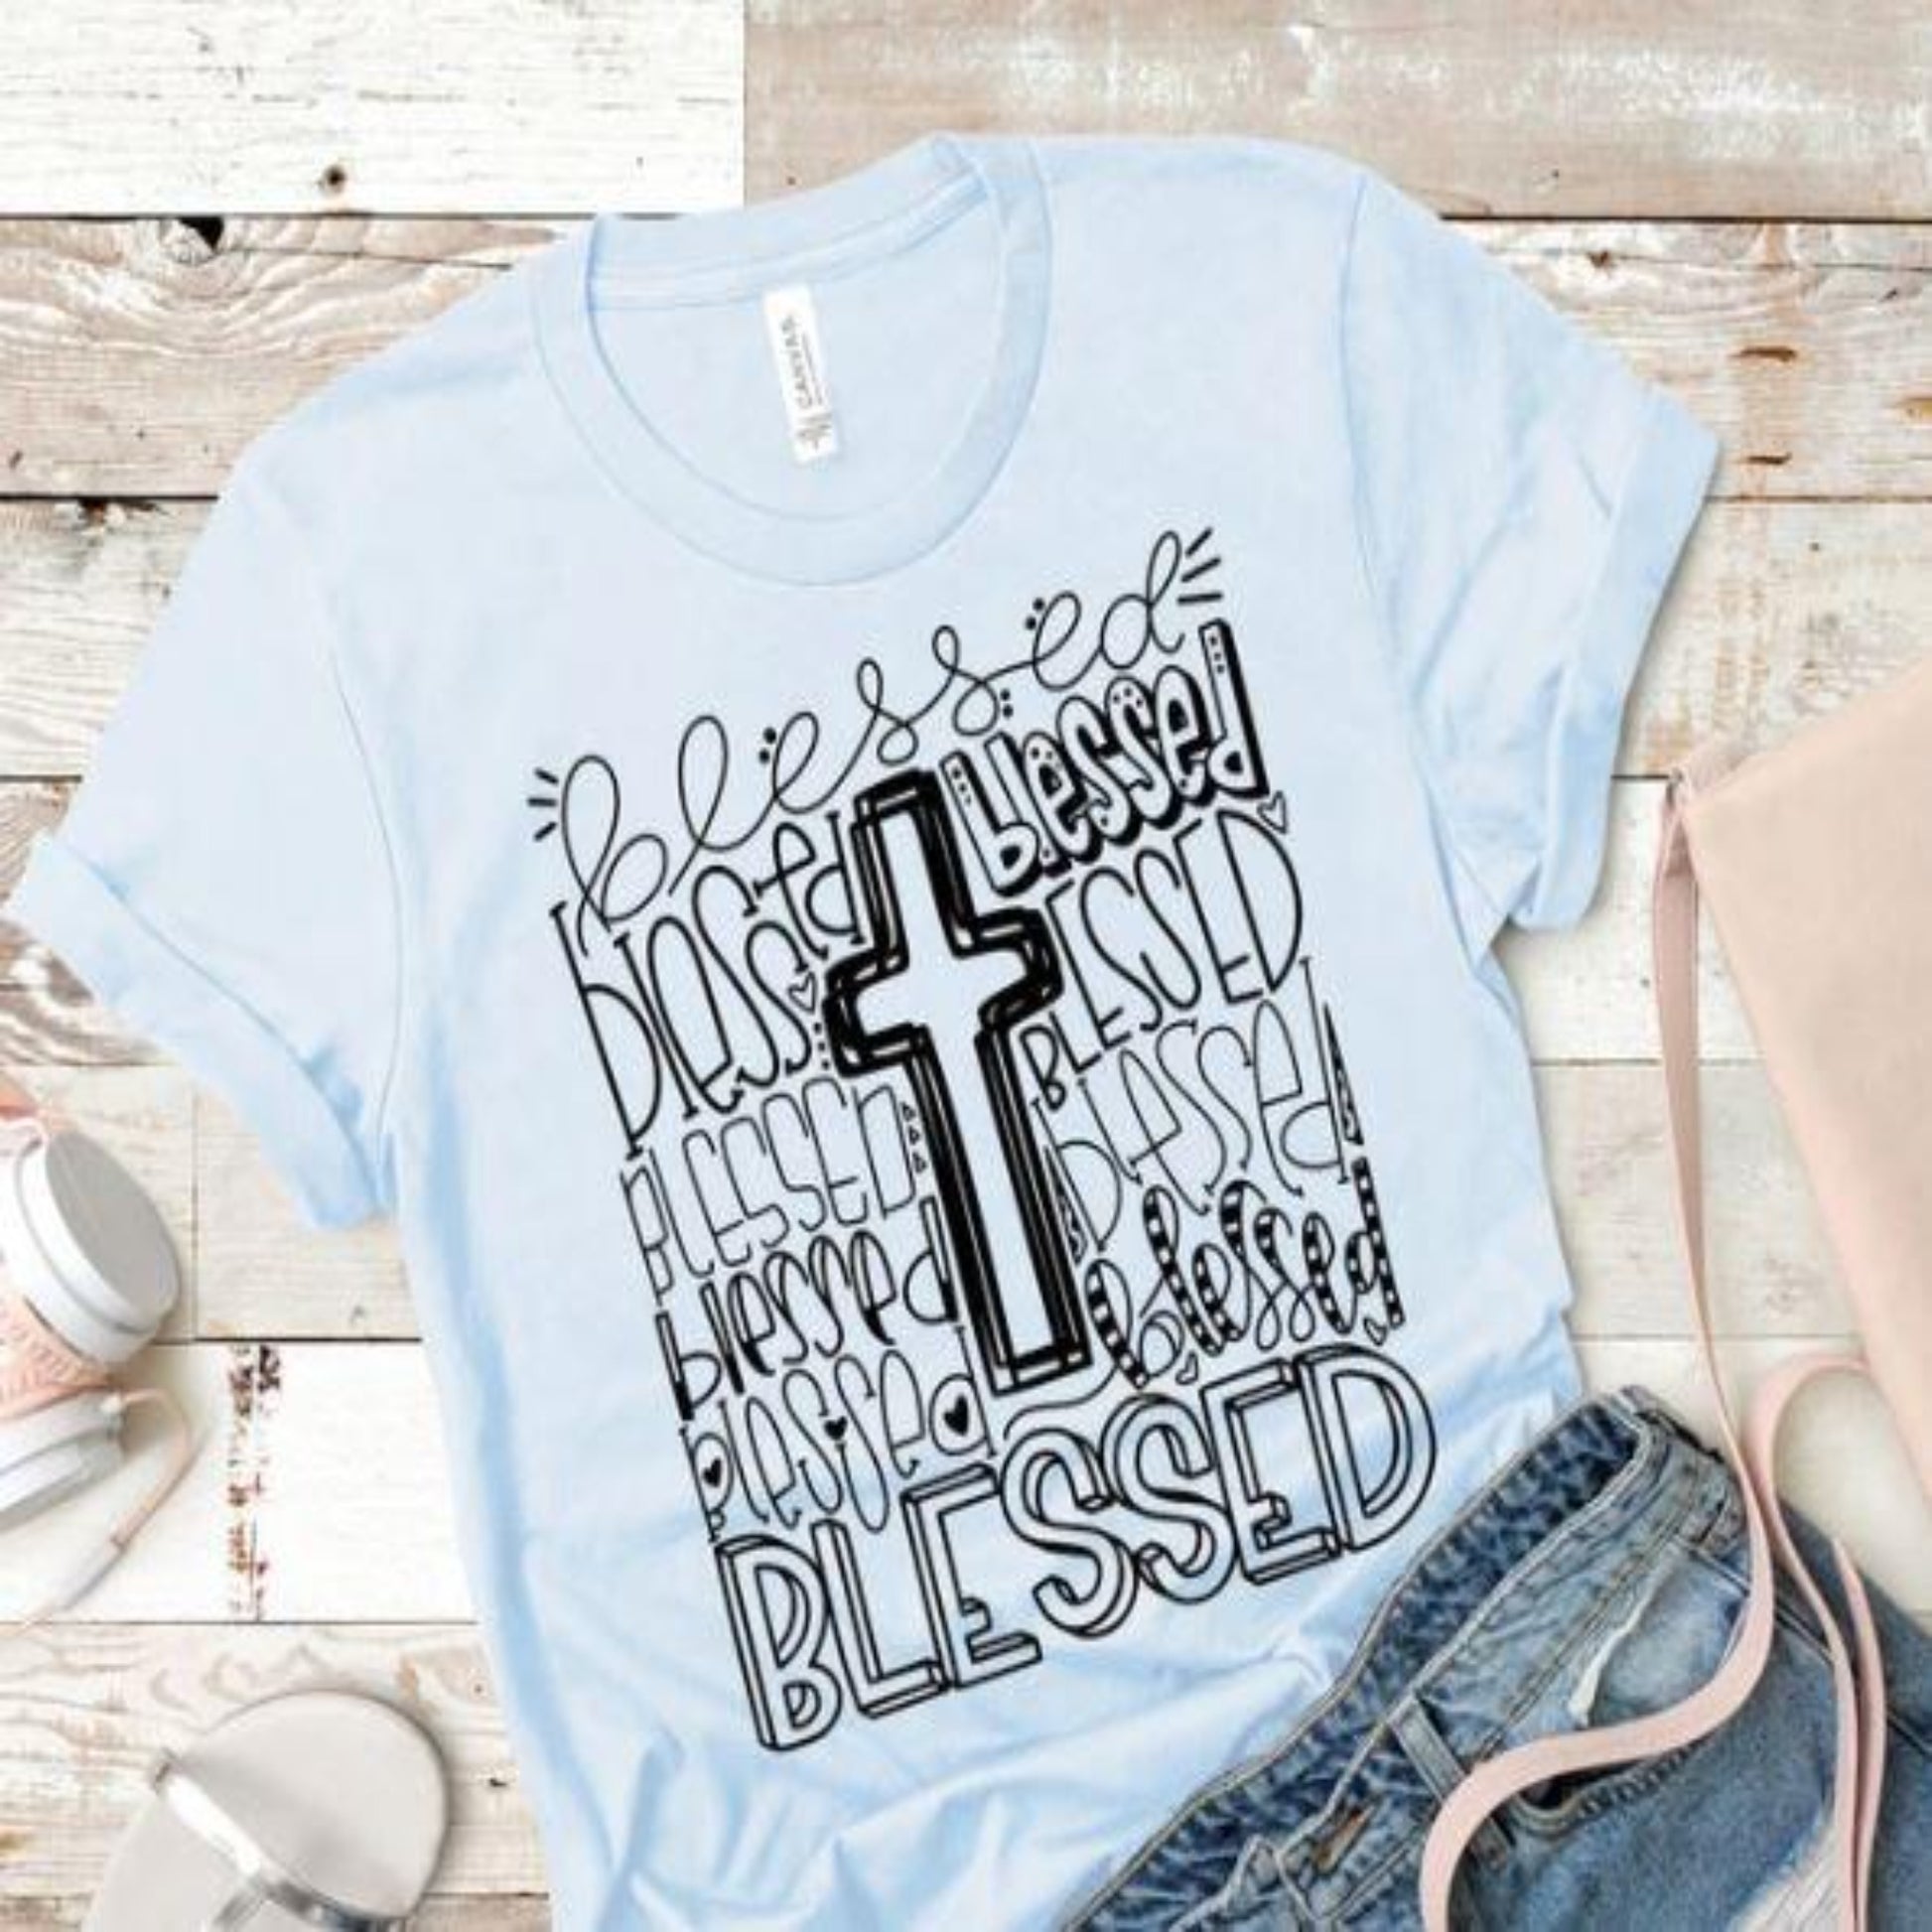 blessed_cross specialty tee everyday tshirt soft shirt